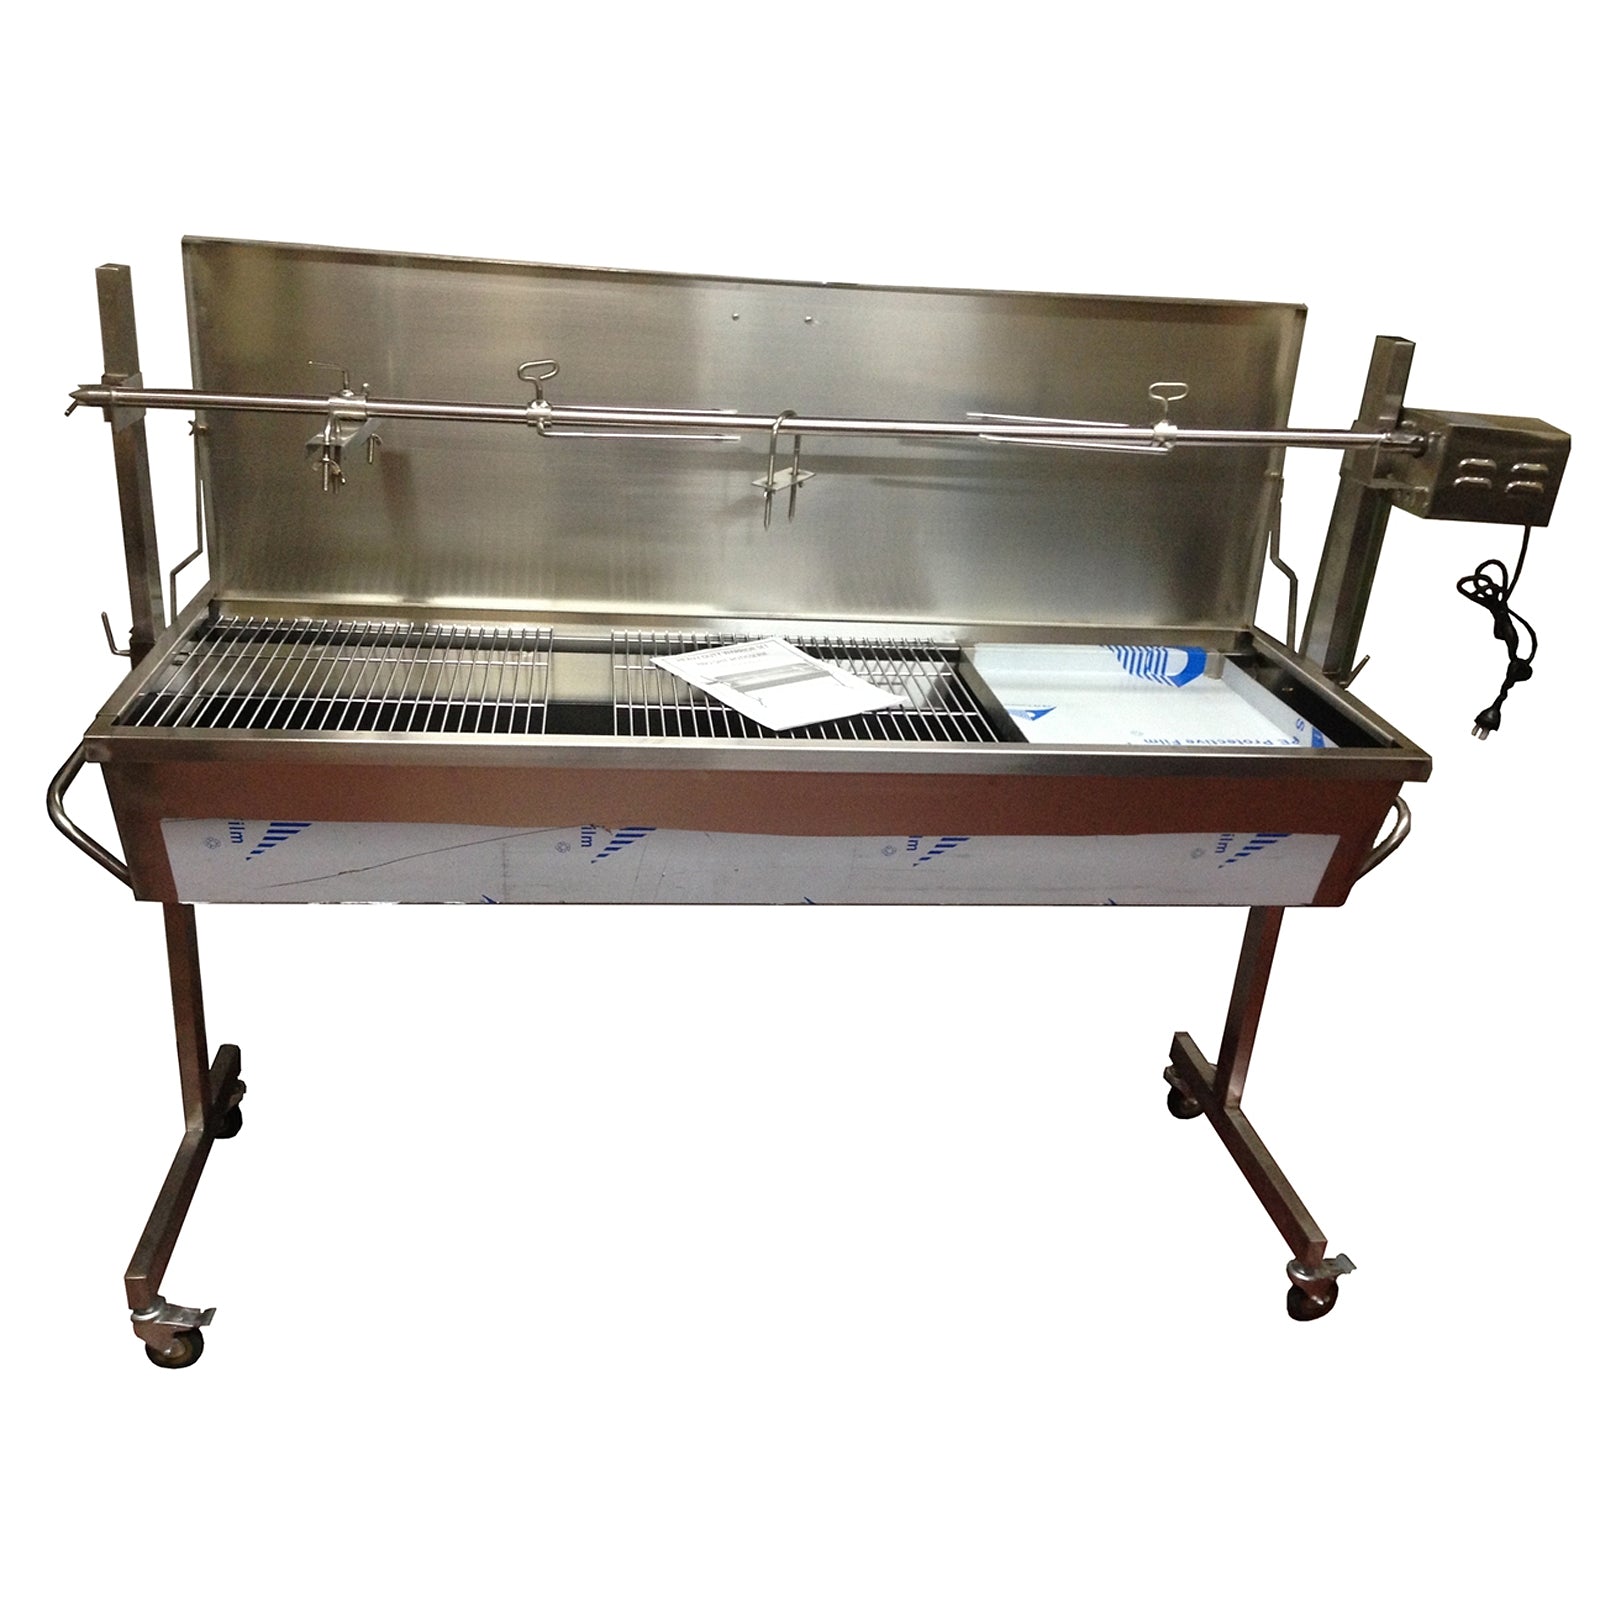 Cyprus Grill - Warrior Heavy Duty 1.5m Charcoal Rotisserie BBQ Spit - Stainless Steel (40kgs capacity)